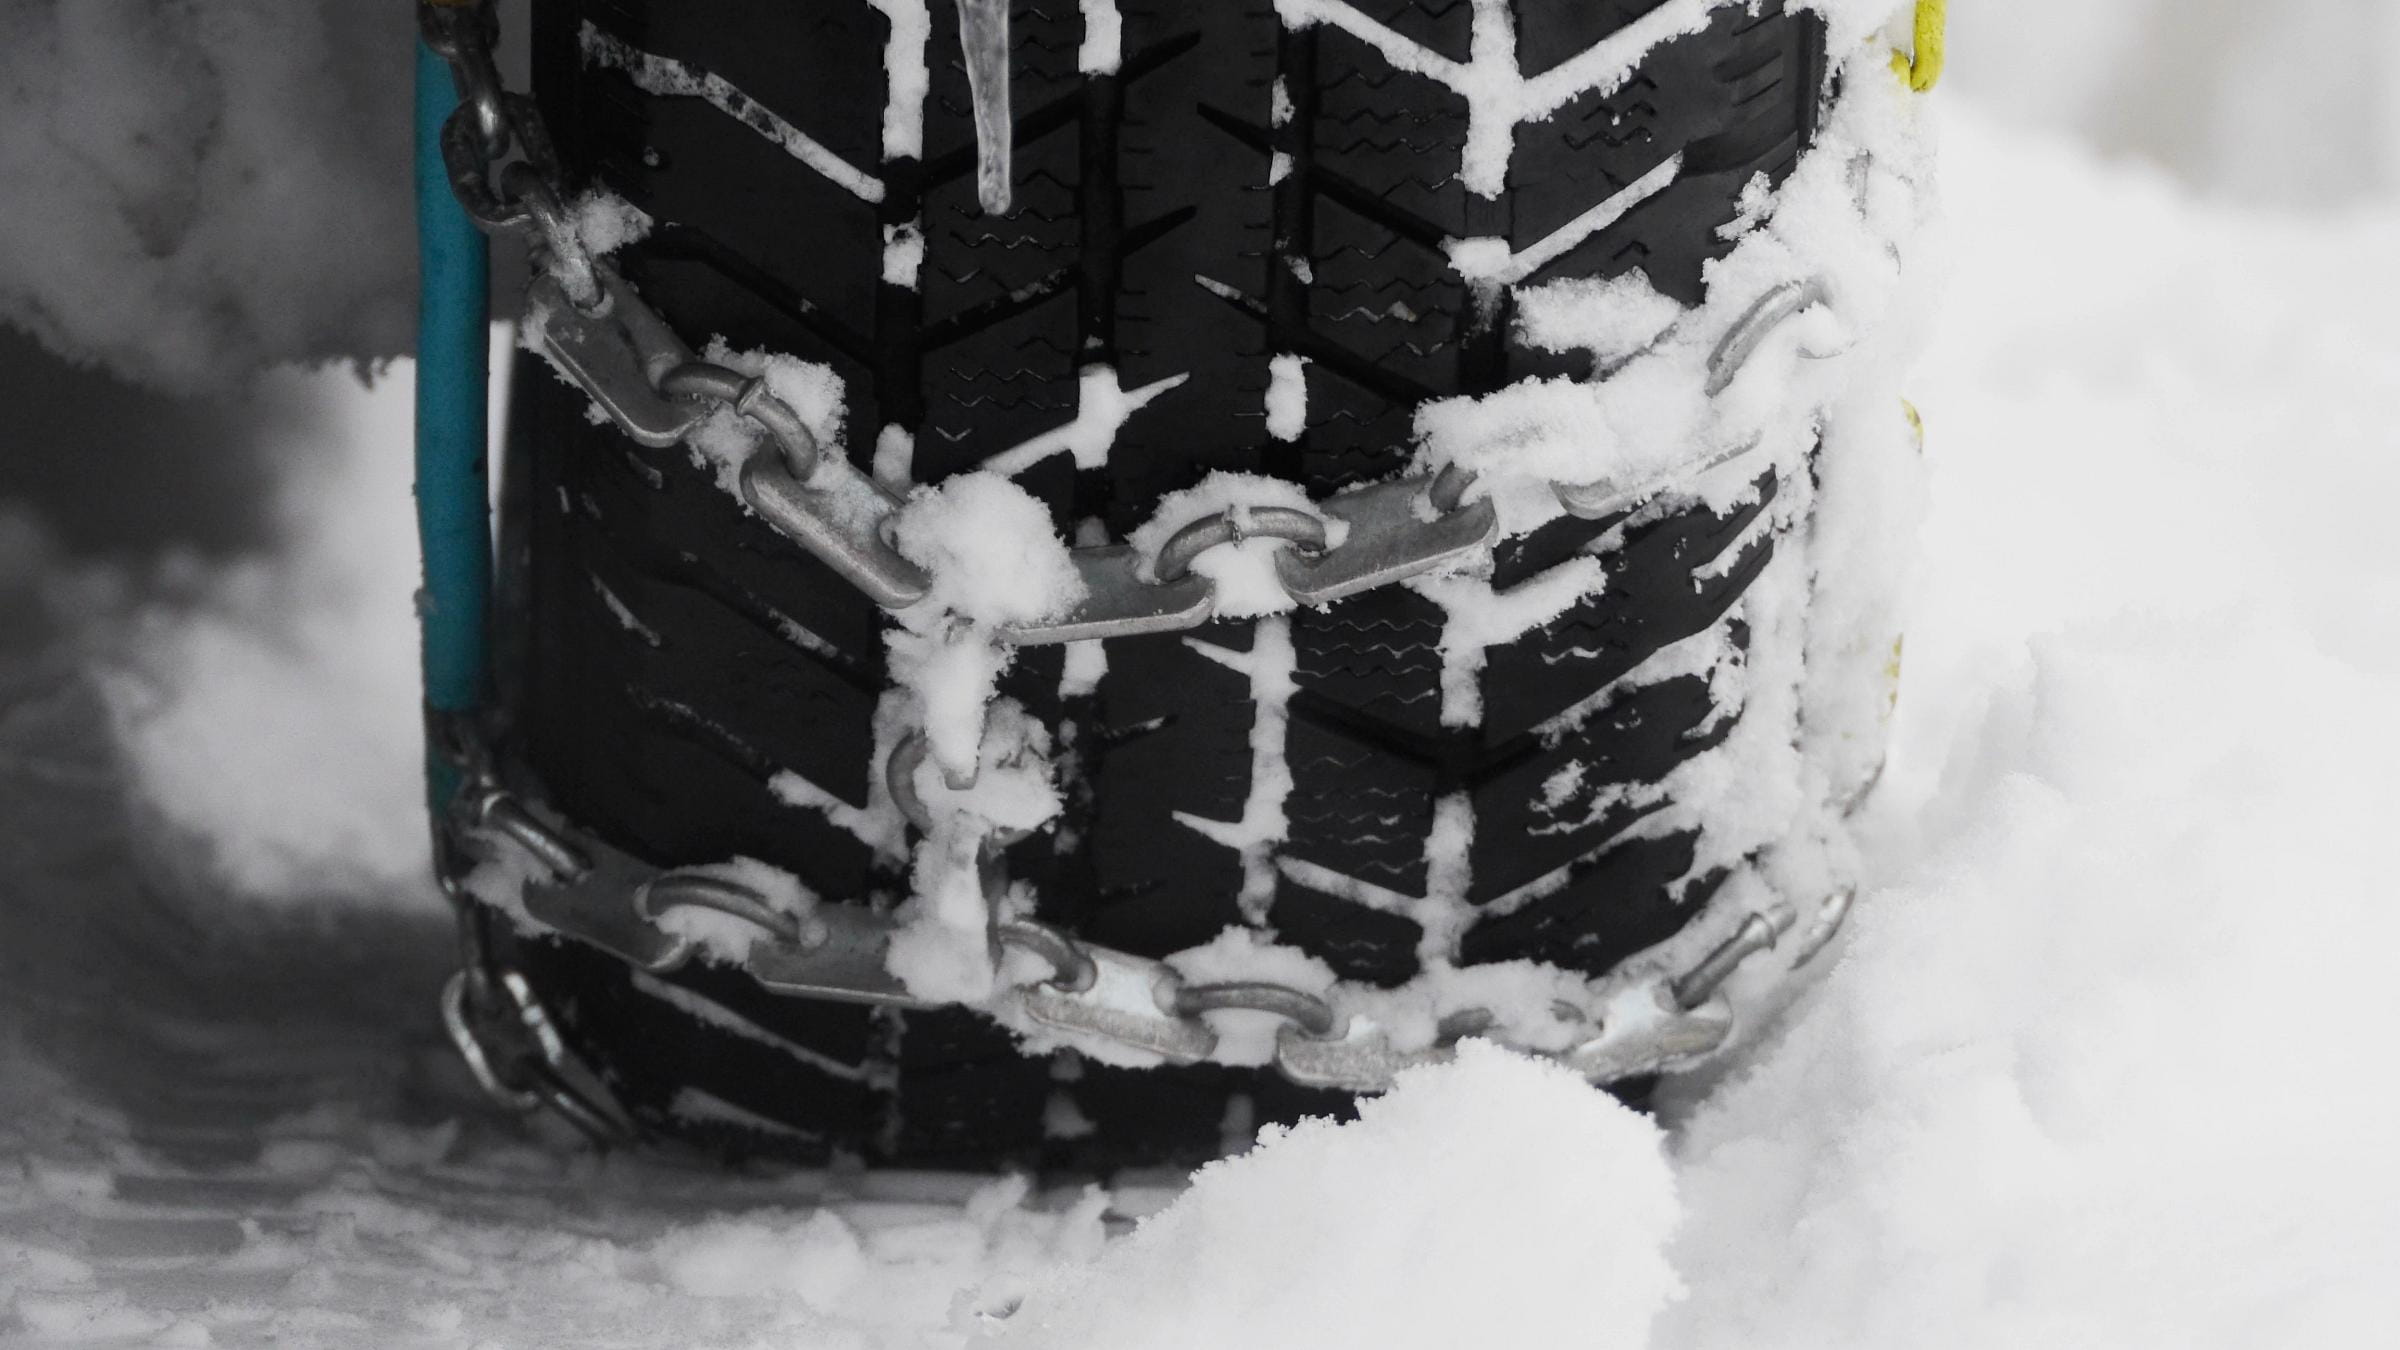 Snow chains outside at a wheel in winter